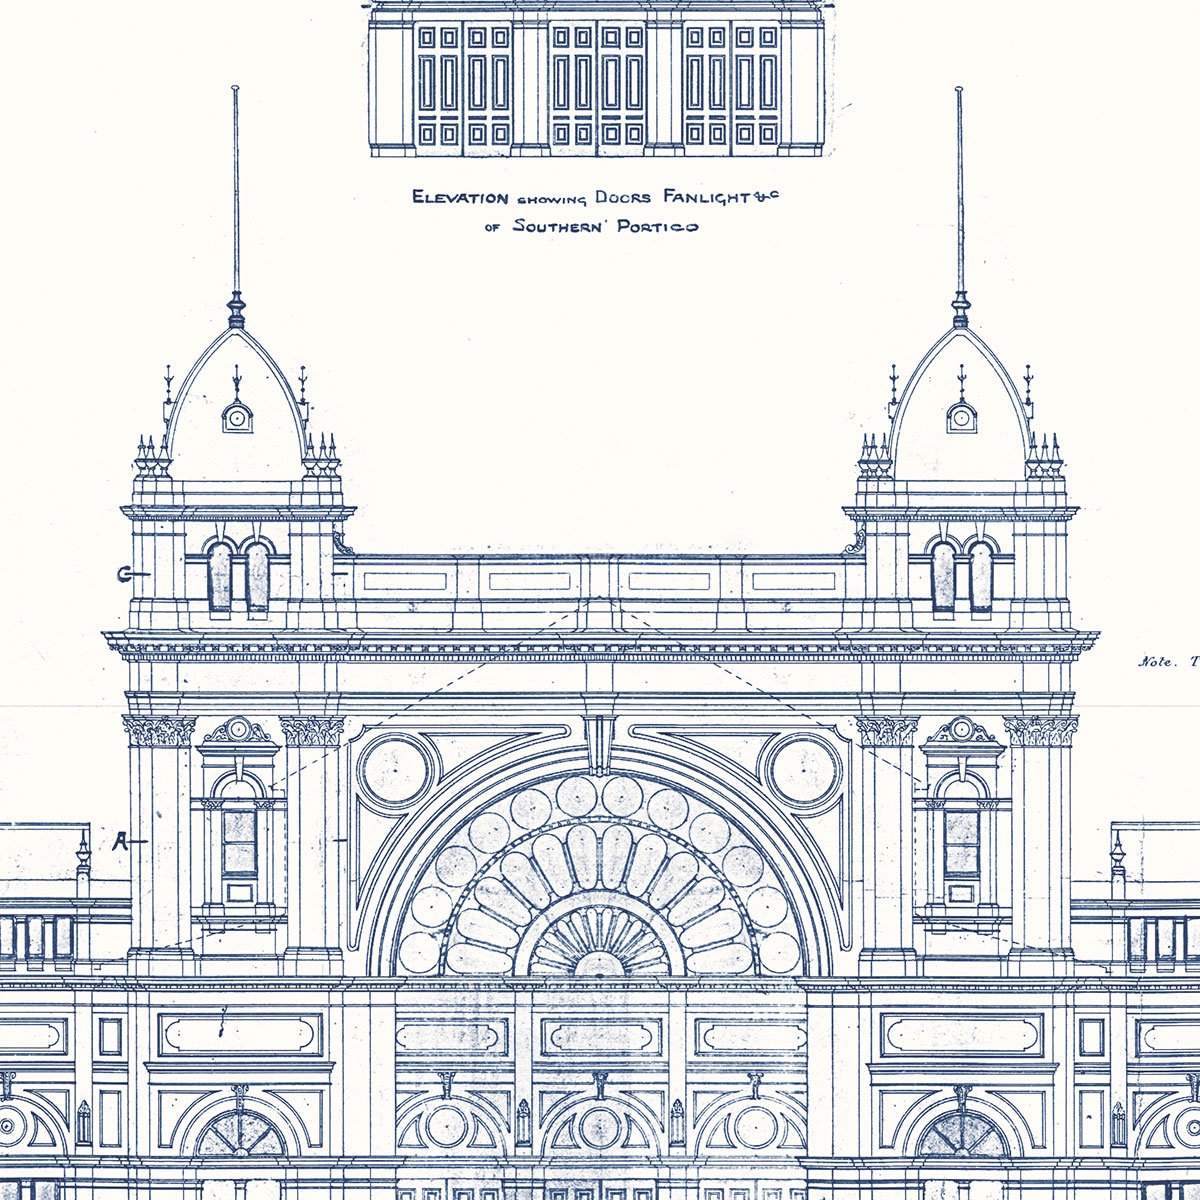 The Melbourne International Exhibition Architecture Poster